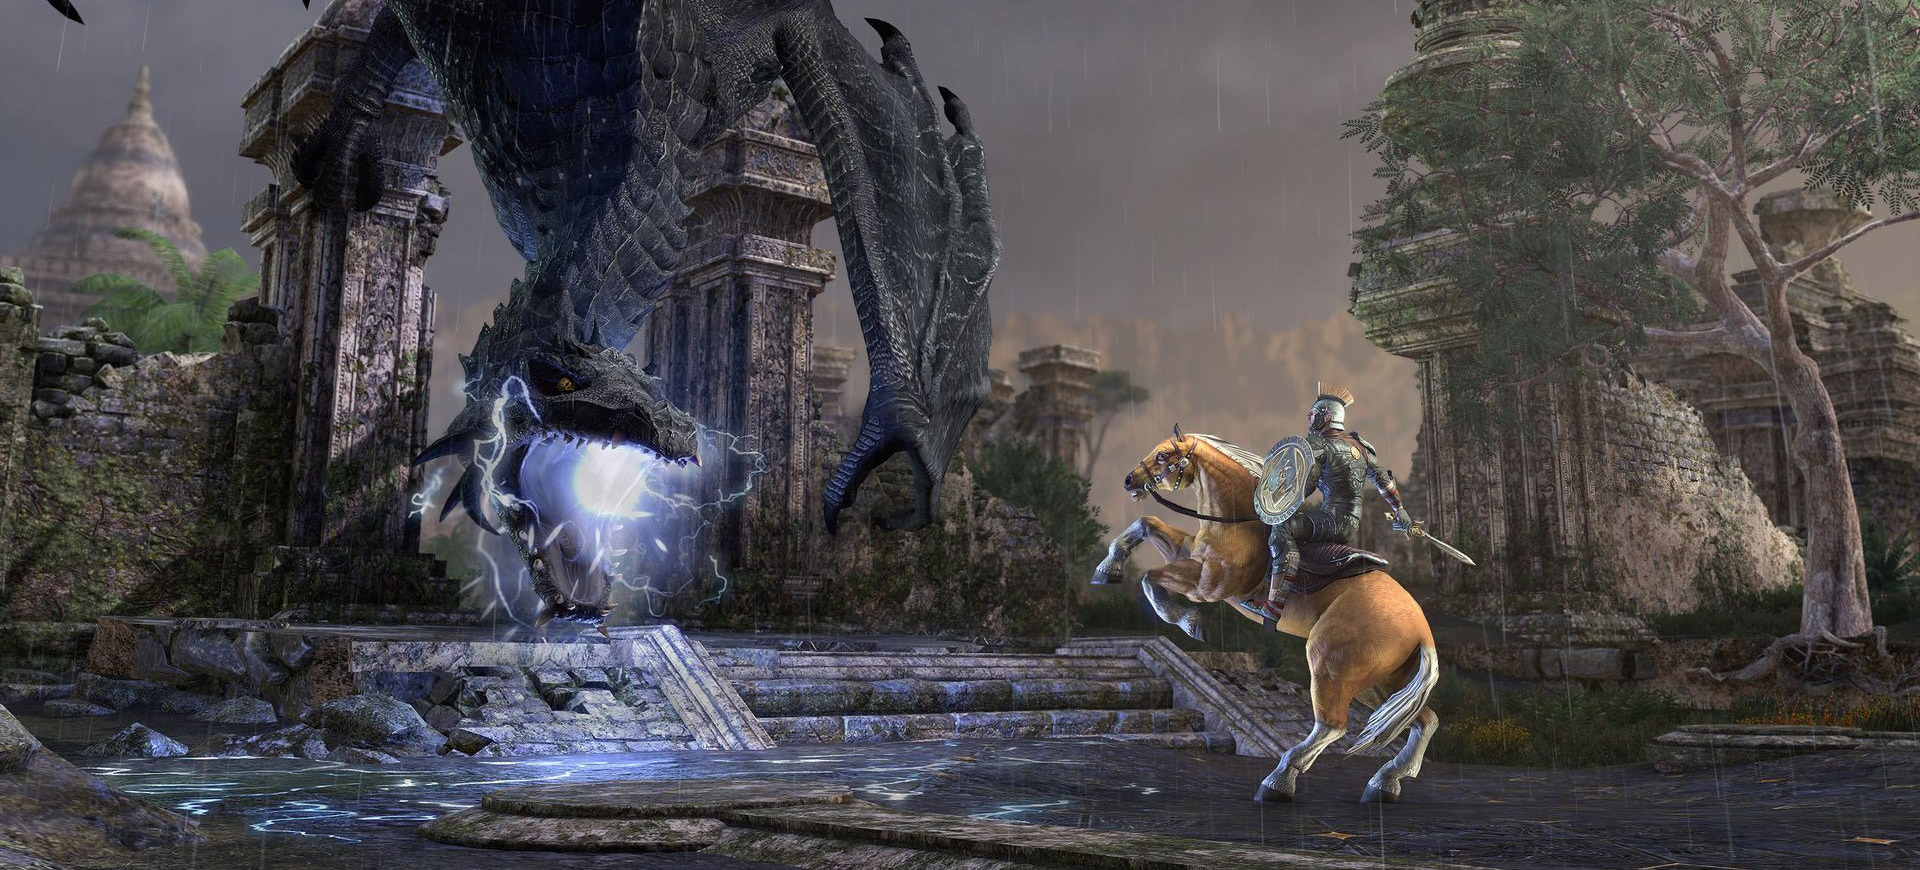 Endeavors in the upcoming update :: The Elder Scrolls Online English